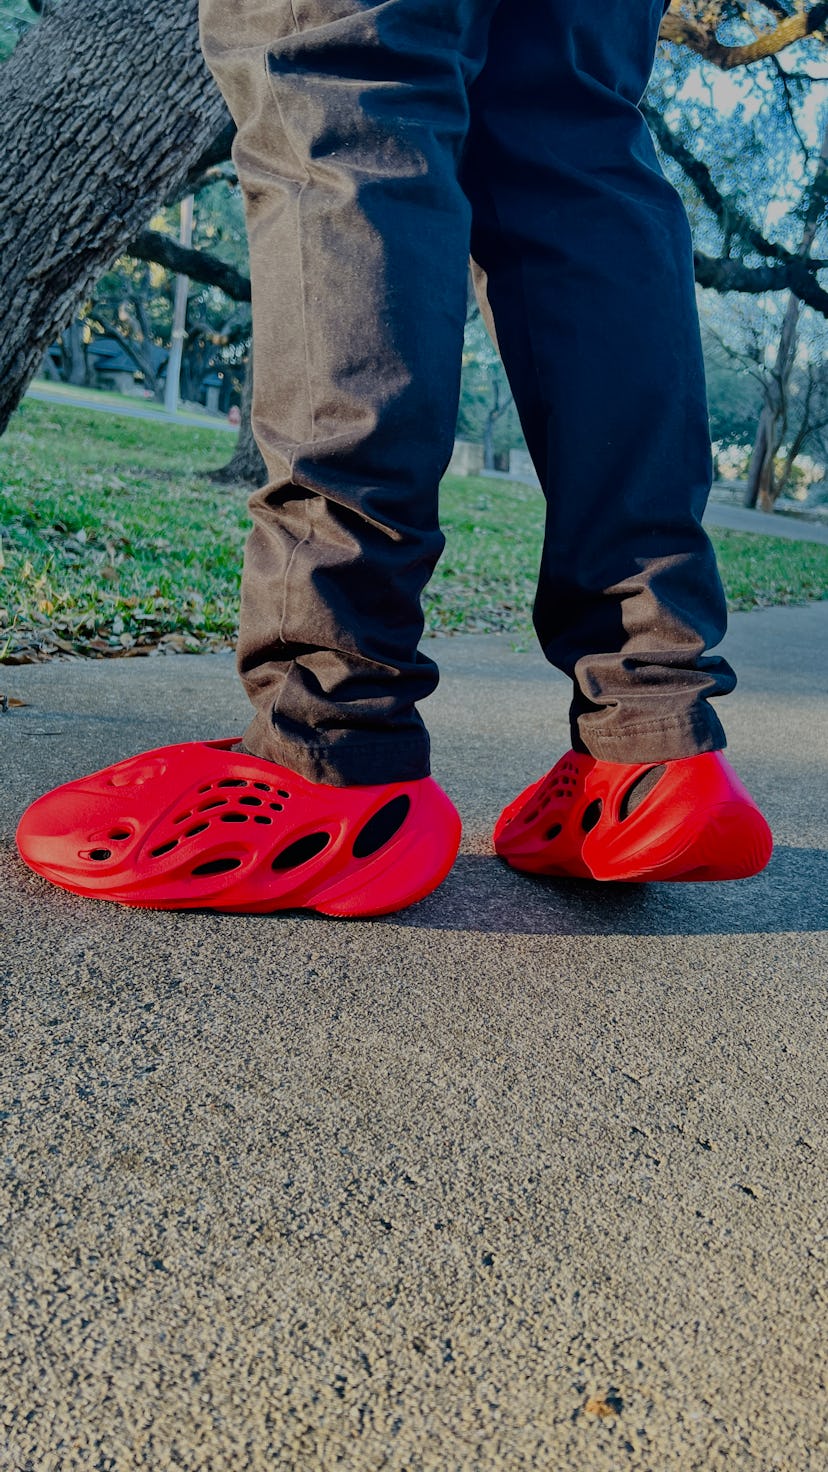 Kanye Adidas Yeezy Foam Runner Red October Vermilion on feet review